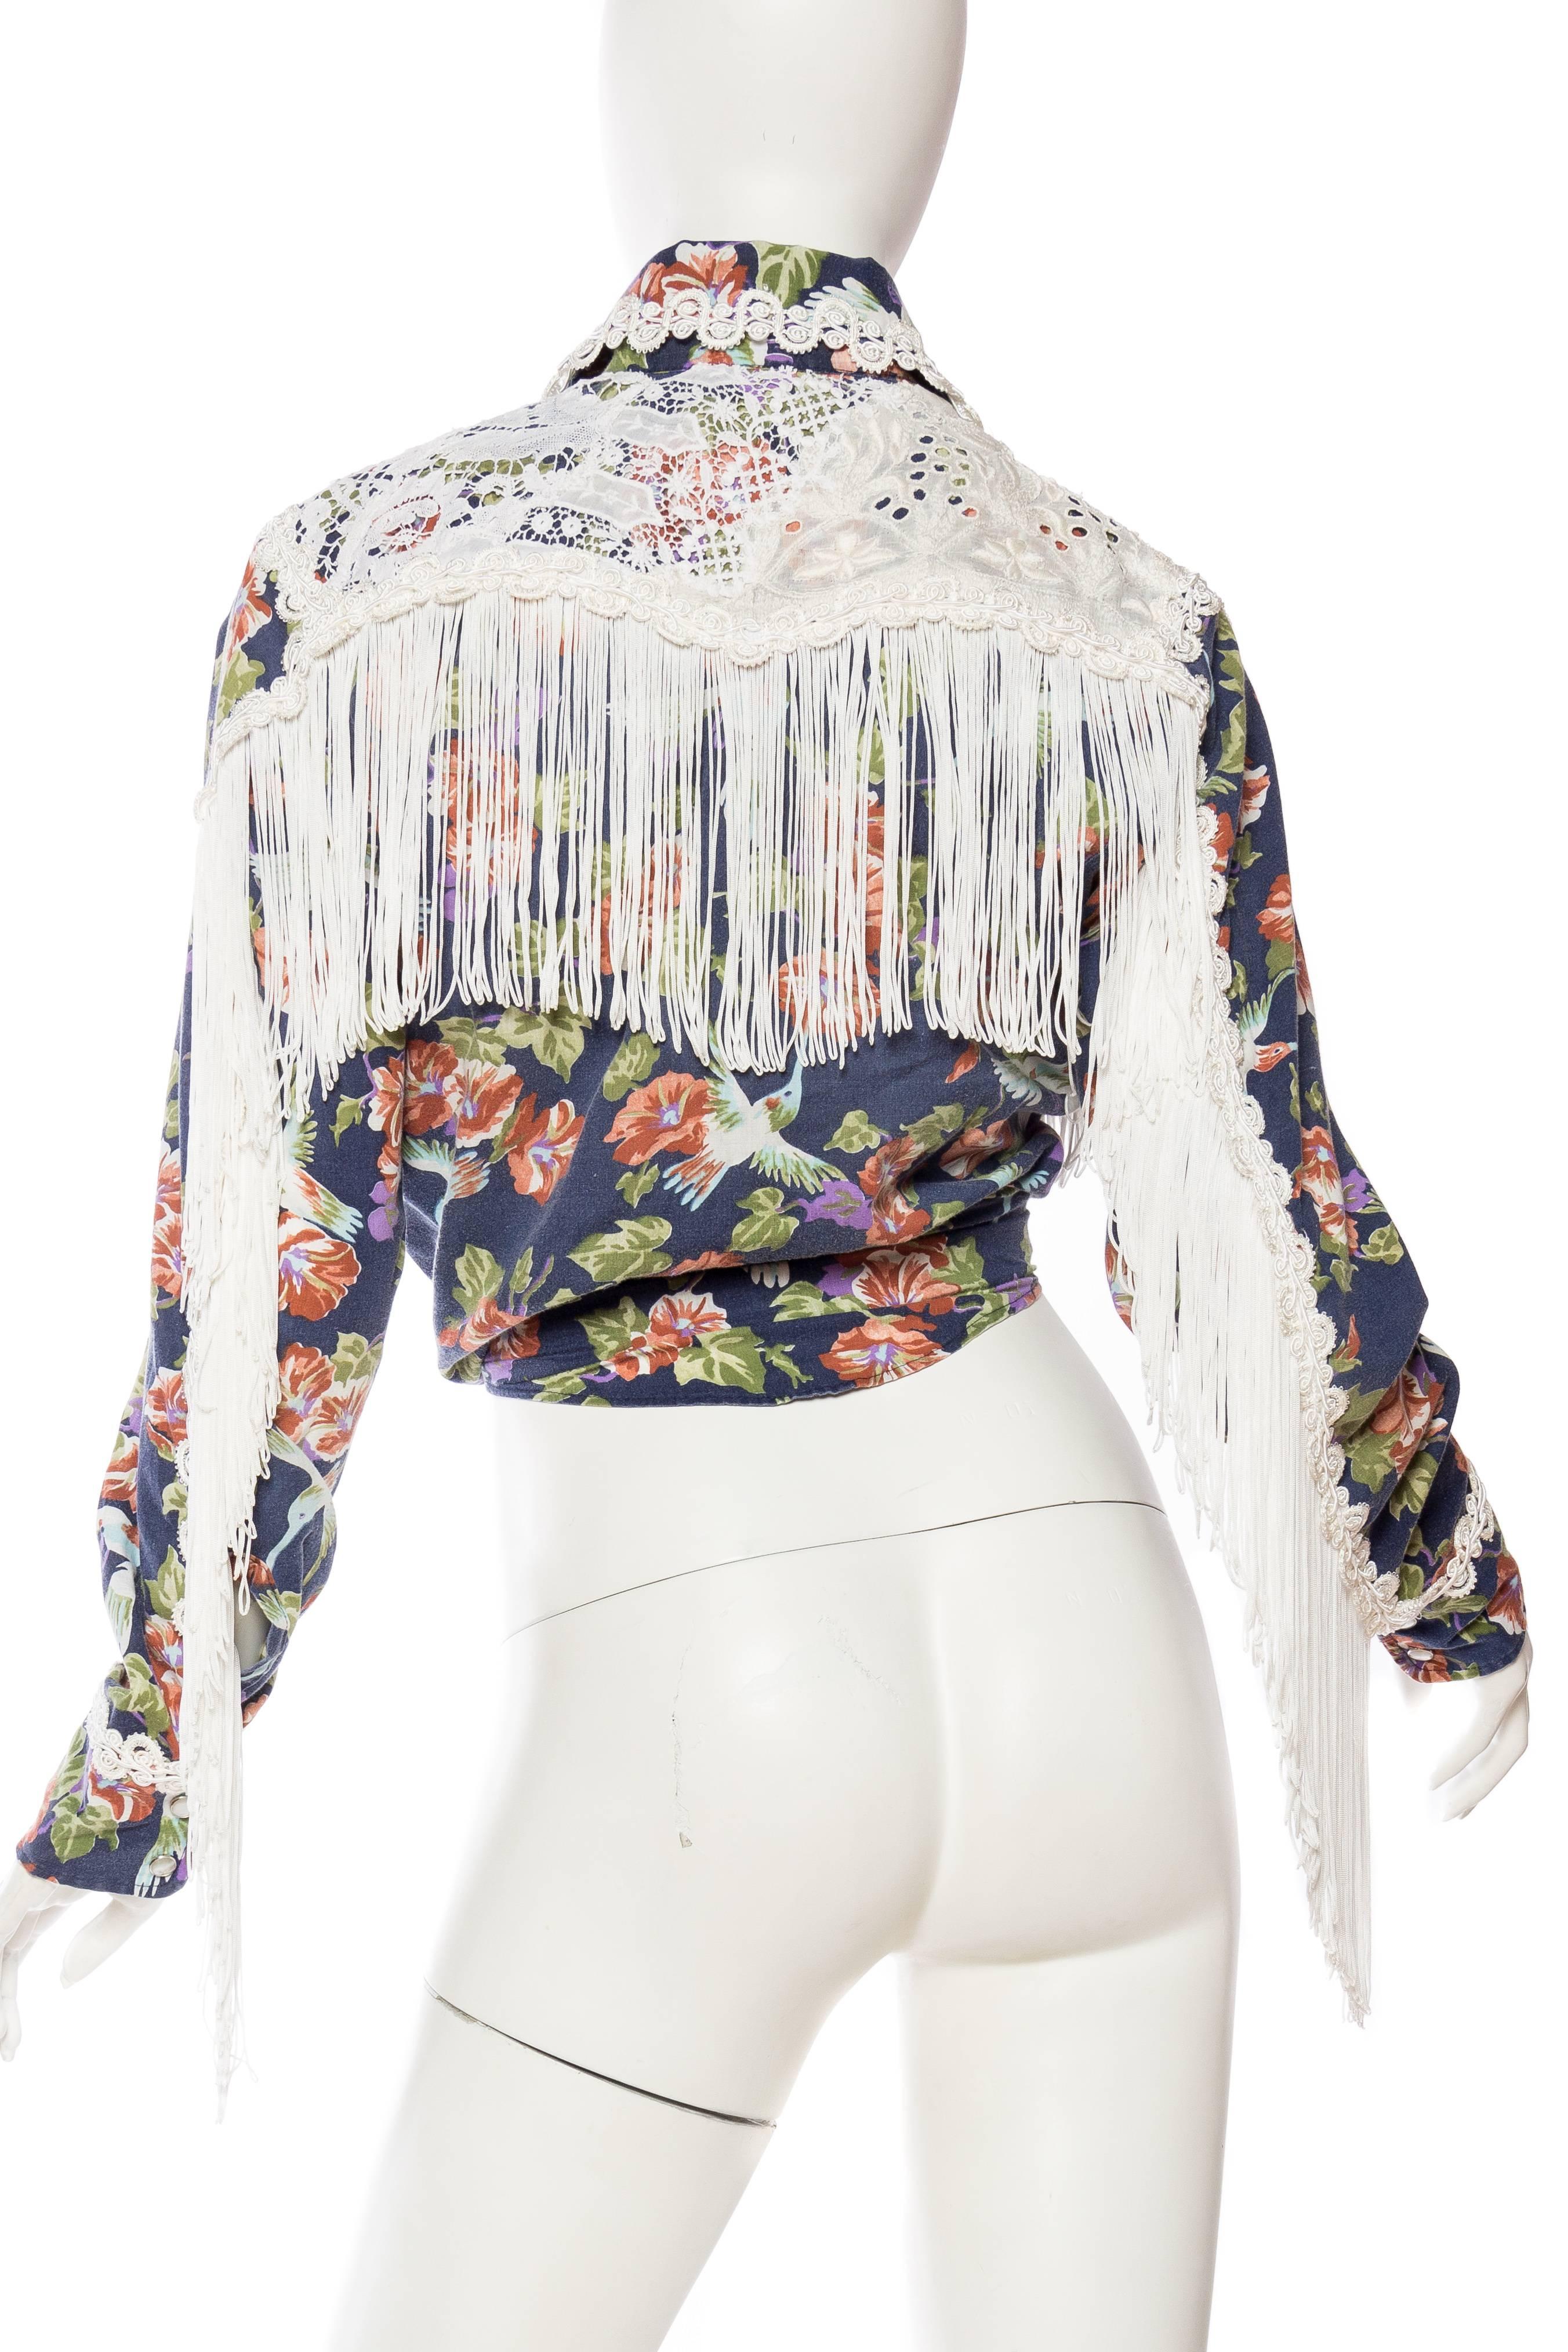 Floral Western Shirt with Fringe and Victorian Lace 1